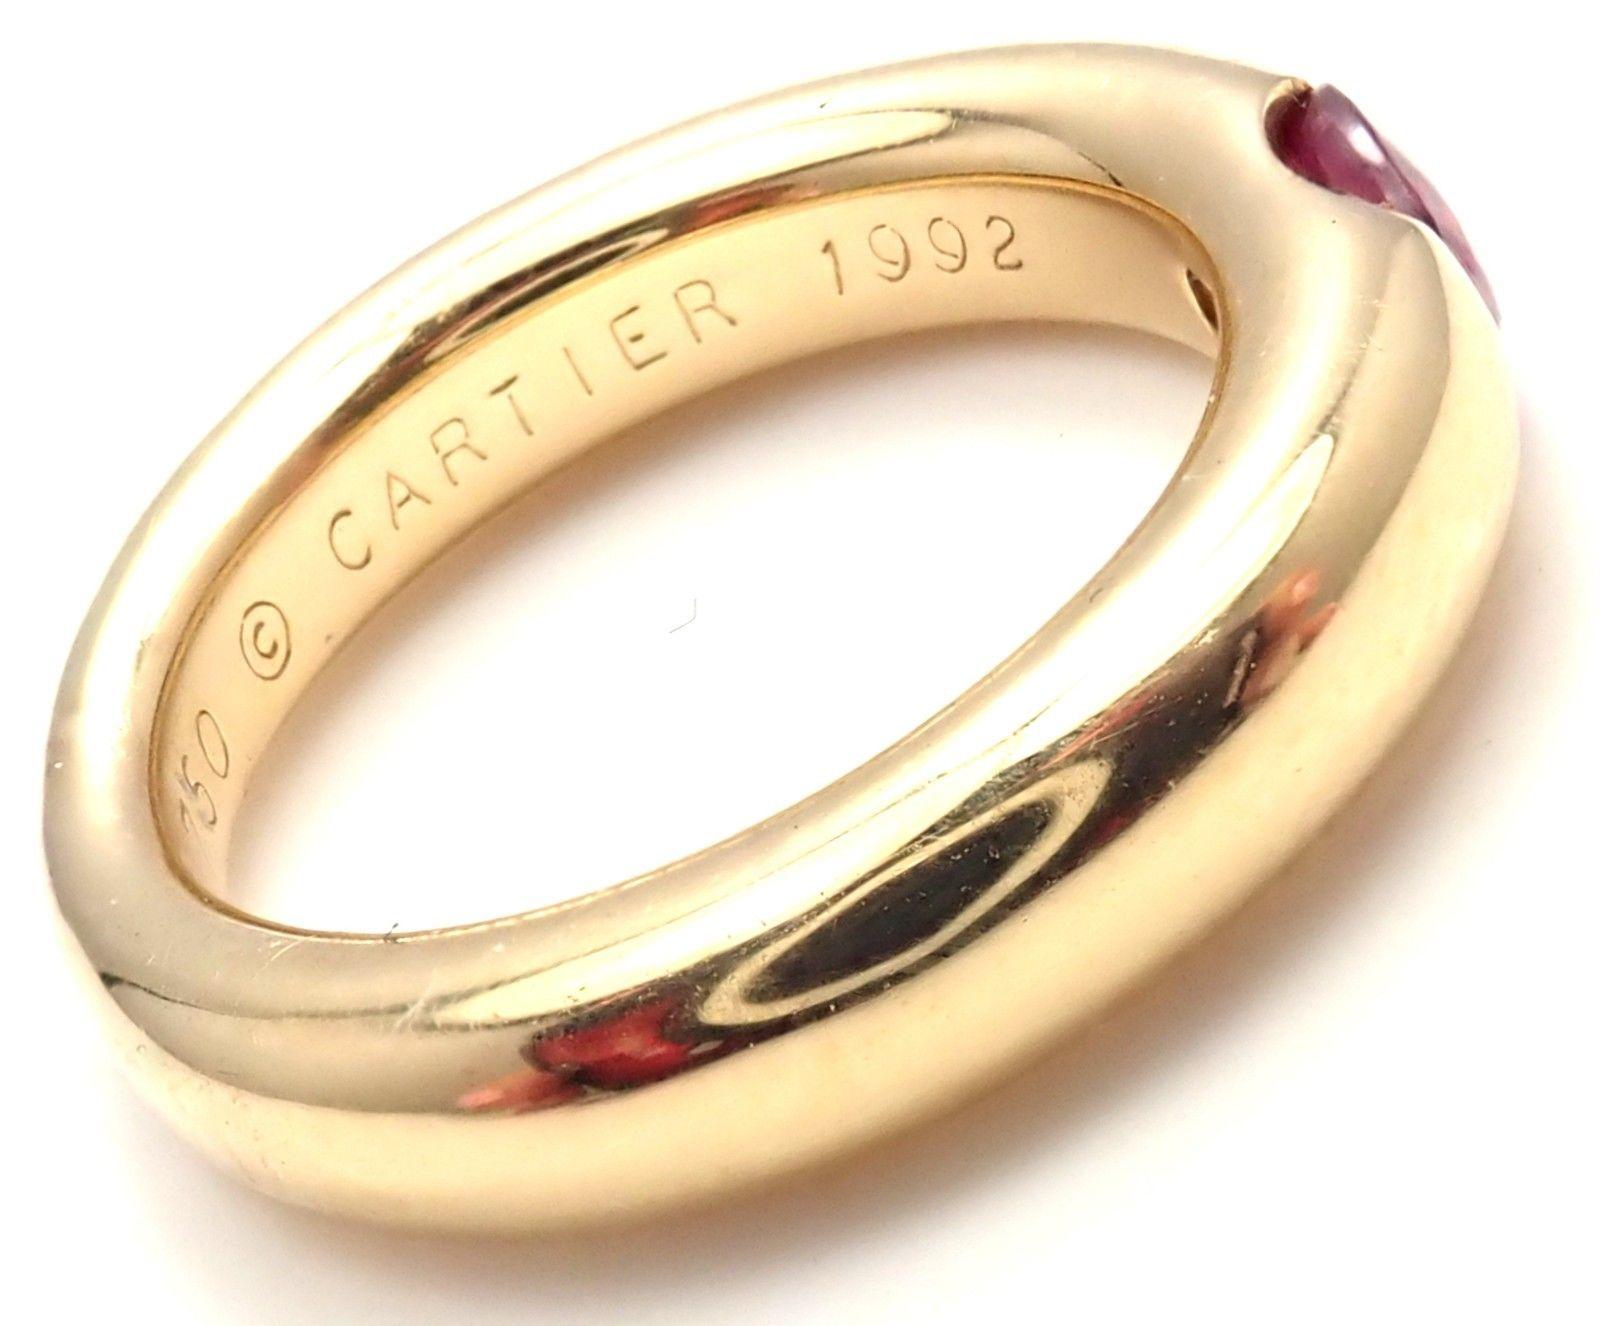 18k Yellow Gold Ellipse Ruby Band Ring by Cartier.
With 1 oval-shaped beautiful ruby 5mm x 4mm.
Details:
Width: 4mm
Weight: 9.3 grams
Ring Size: European 48, US 4 1/2
Stamped Hallmarks: Cartier 750 48 1992 D 08455
*Free Shipping within the United